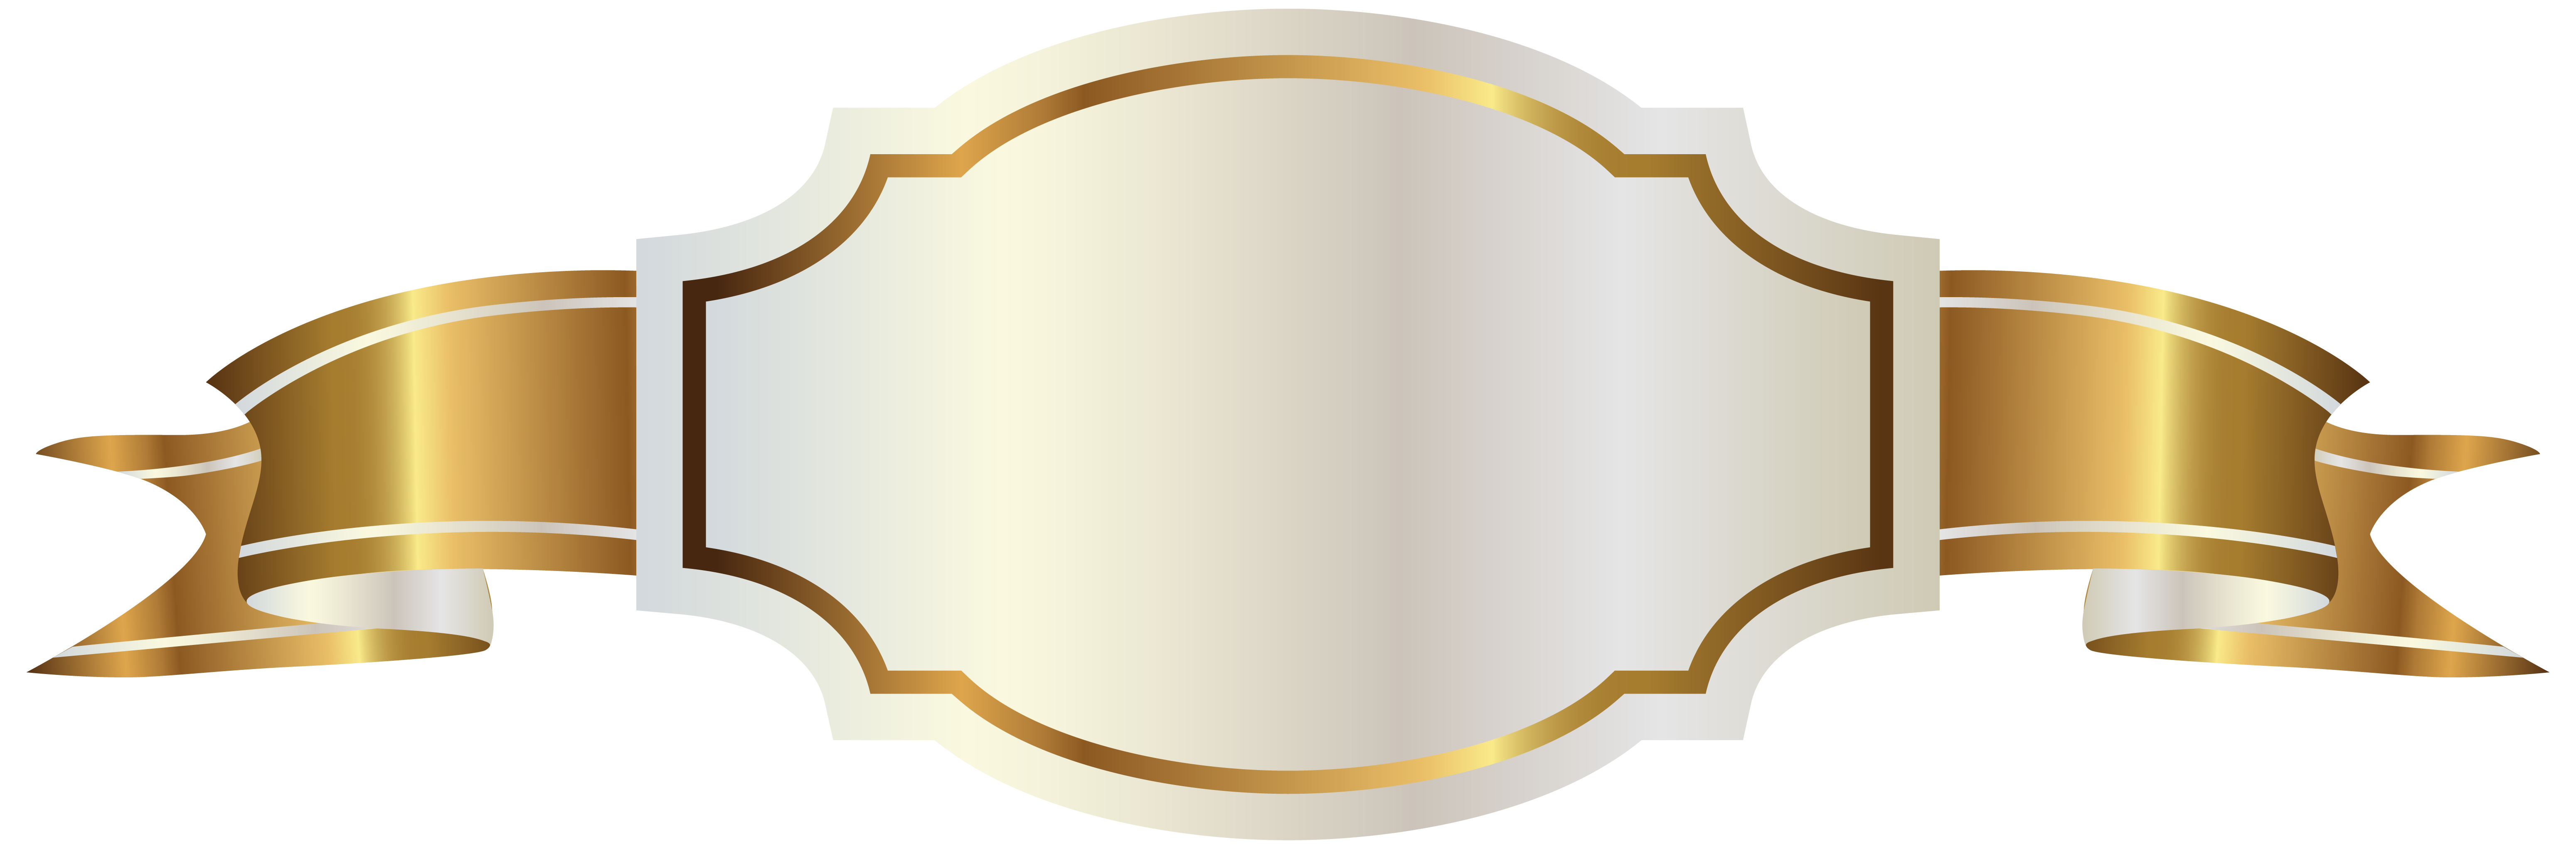 White Label and Gold Banner PNG Clipart Image